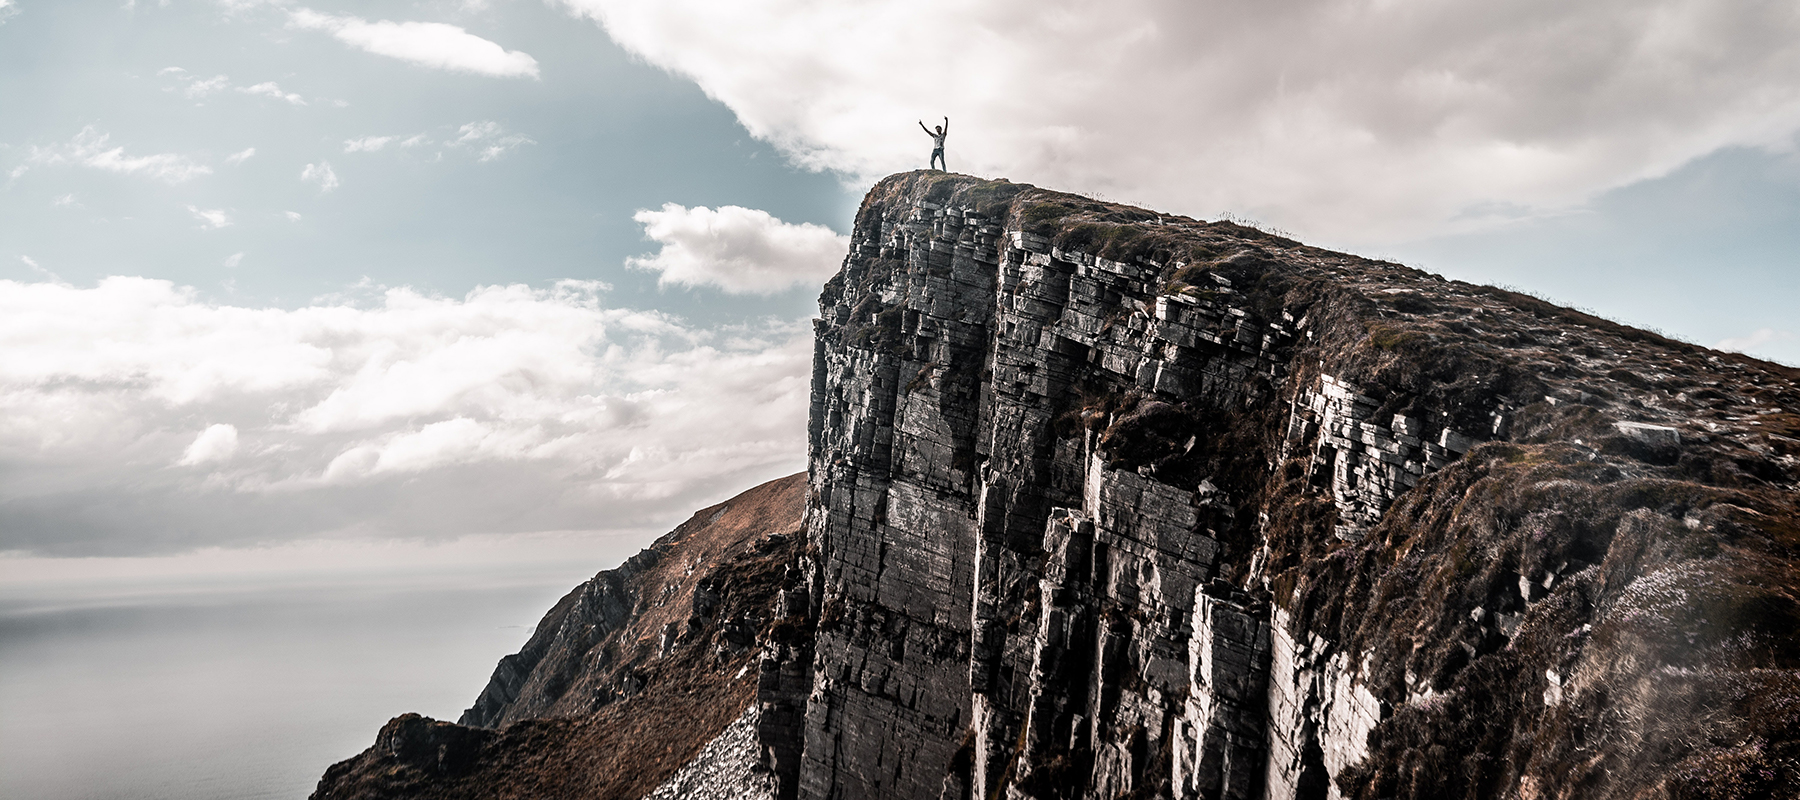 Heroic Fundraising Featured Image_A Person Standing on Top of a Mountain